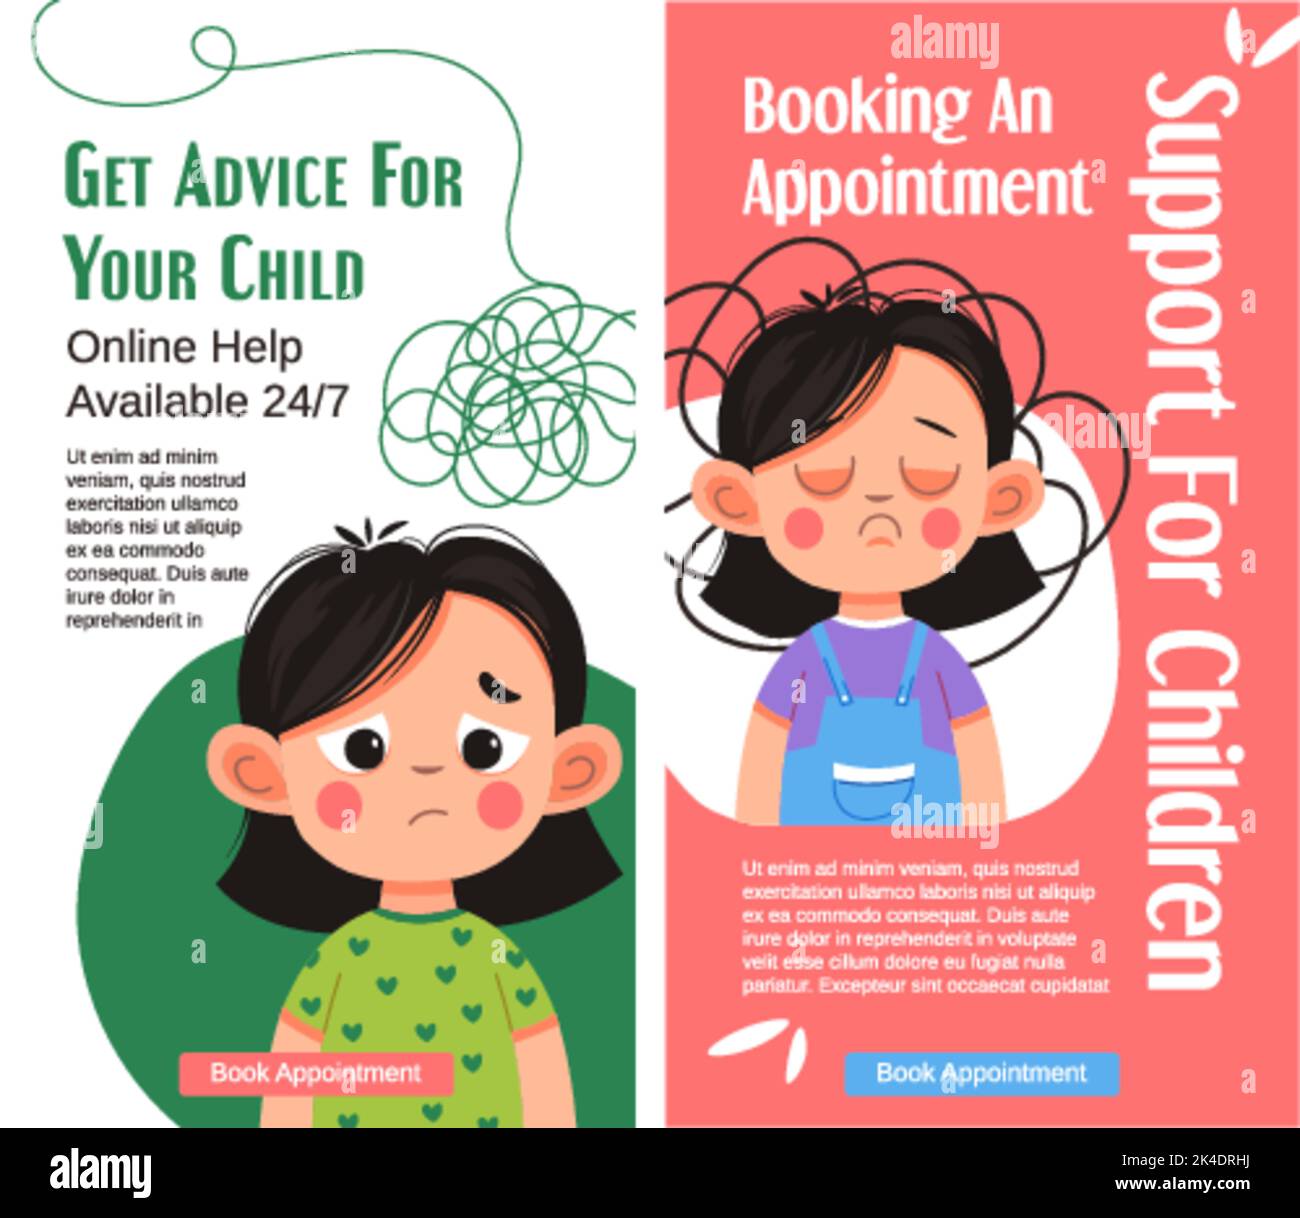 Get advice for your child, booking appointments Stock Vector